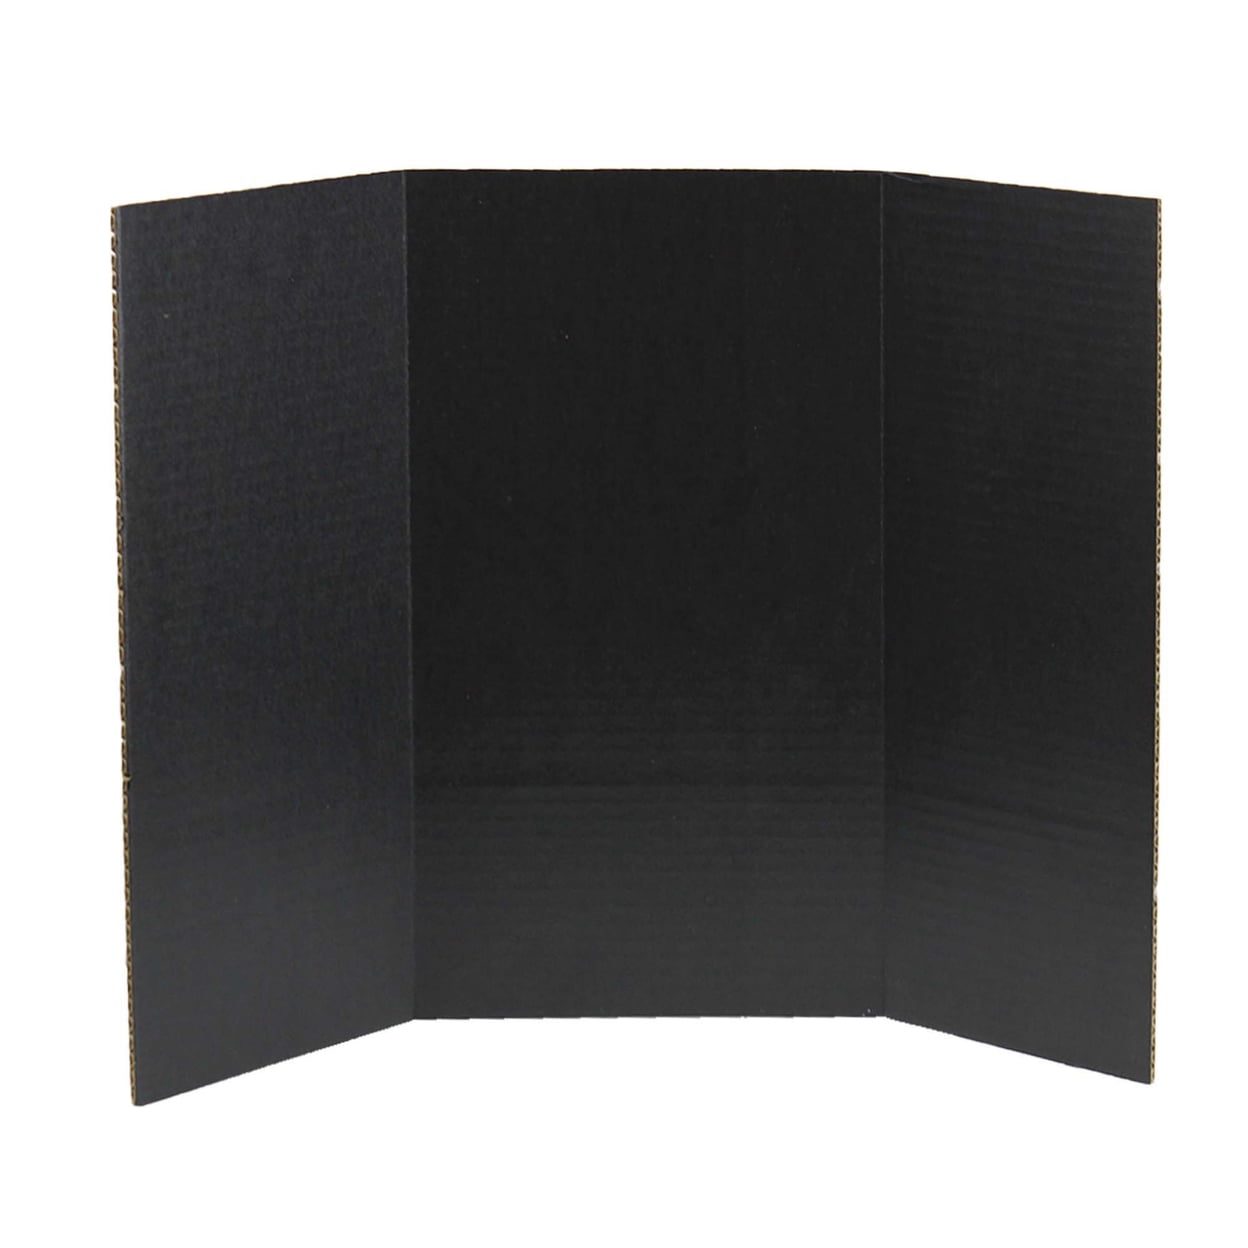 Office, School, Home, College 15 x 20 Black Mini Project Board Pack of ...